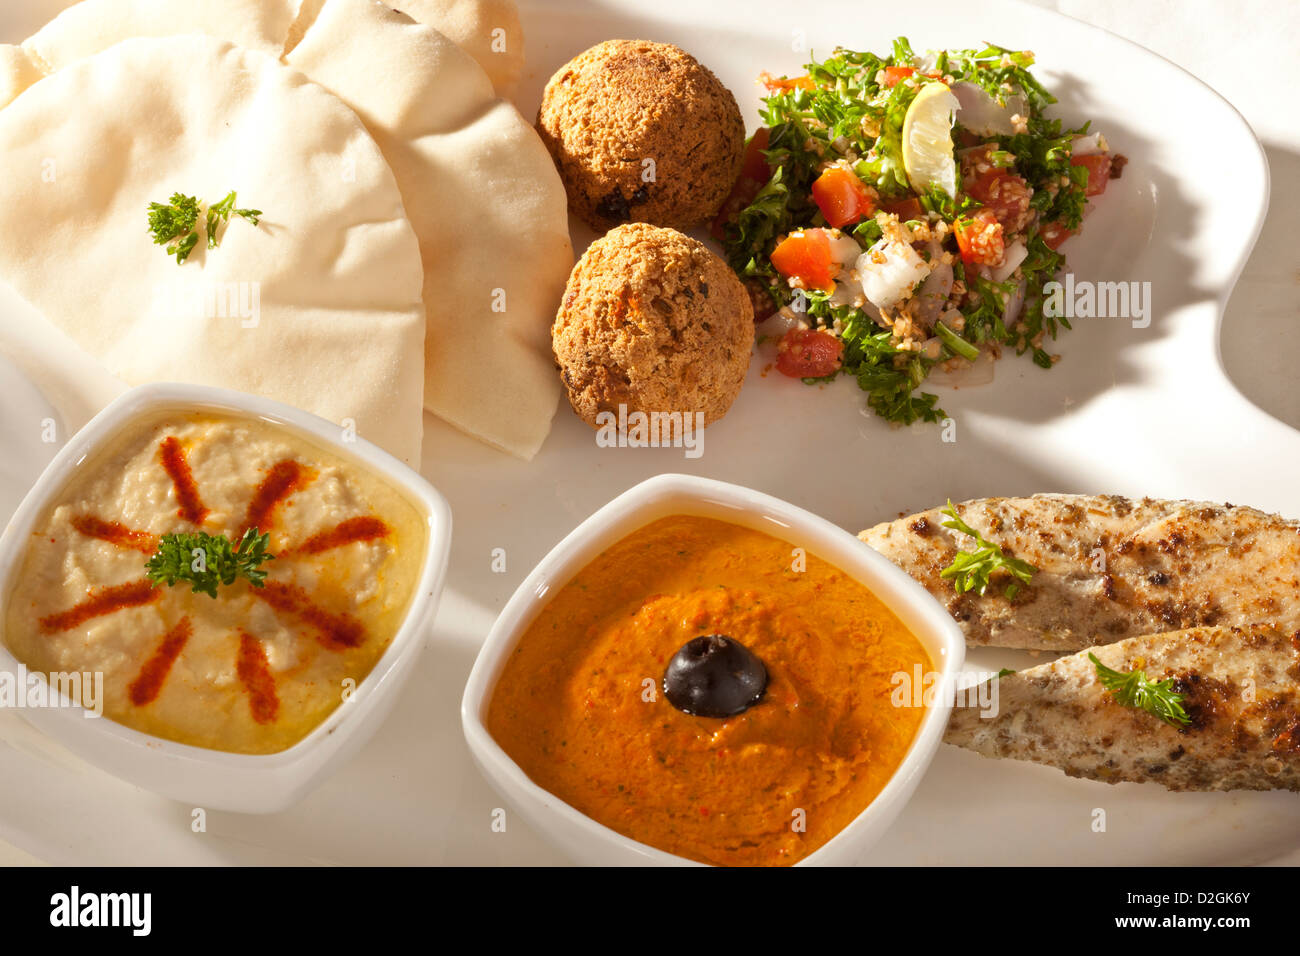 kebab platter with pita bread, meat ball, grilled chicken, hummus and salad. Stock Photo